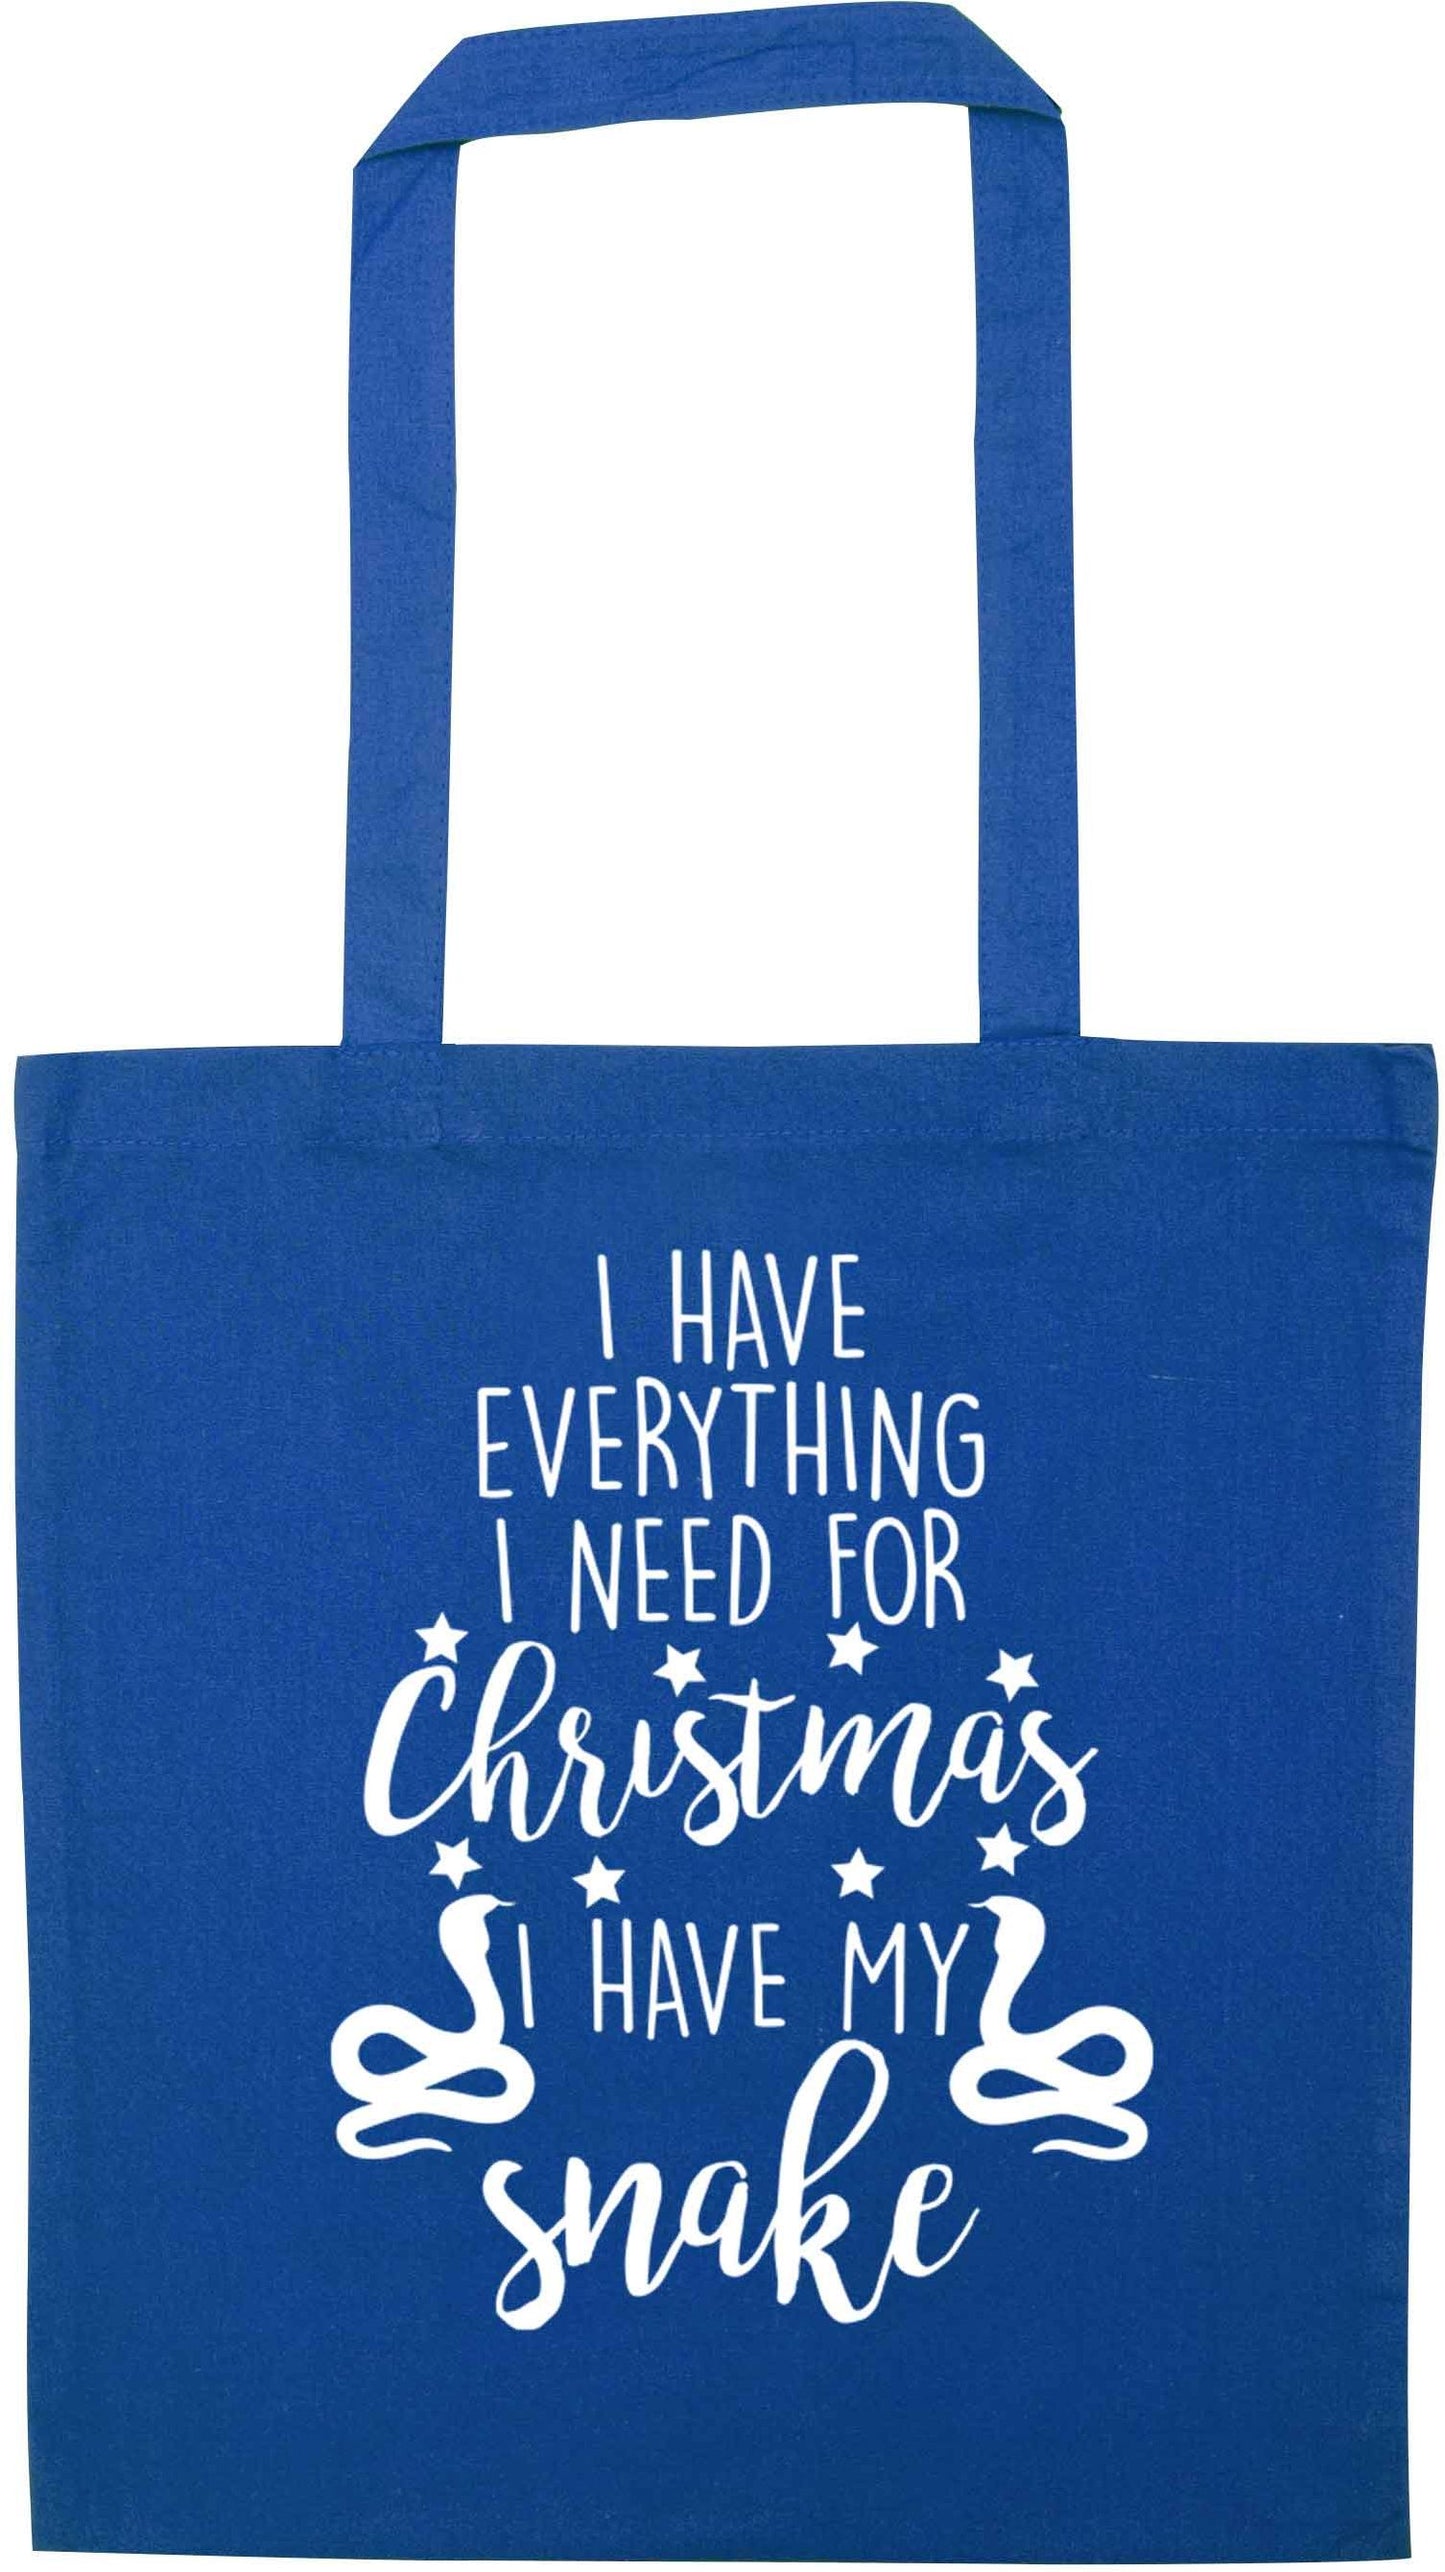 I have everything I need for Christmas I have my snake blue tote bag